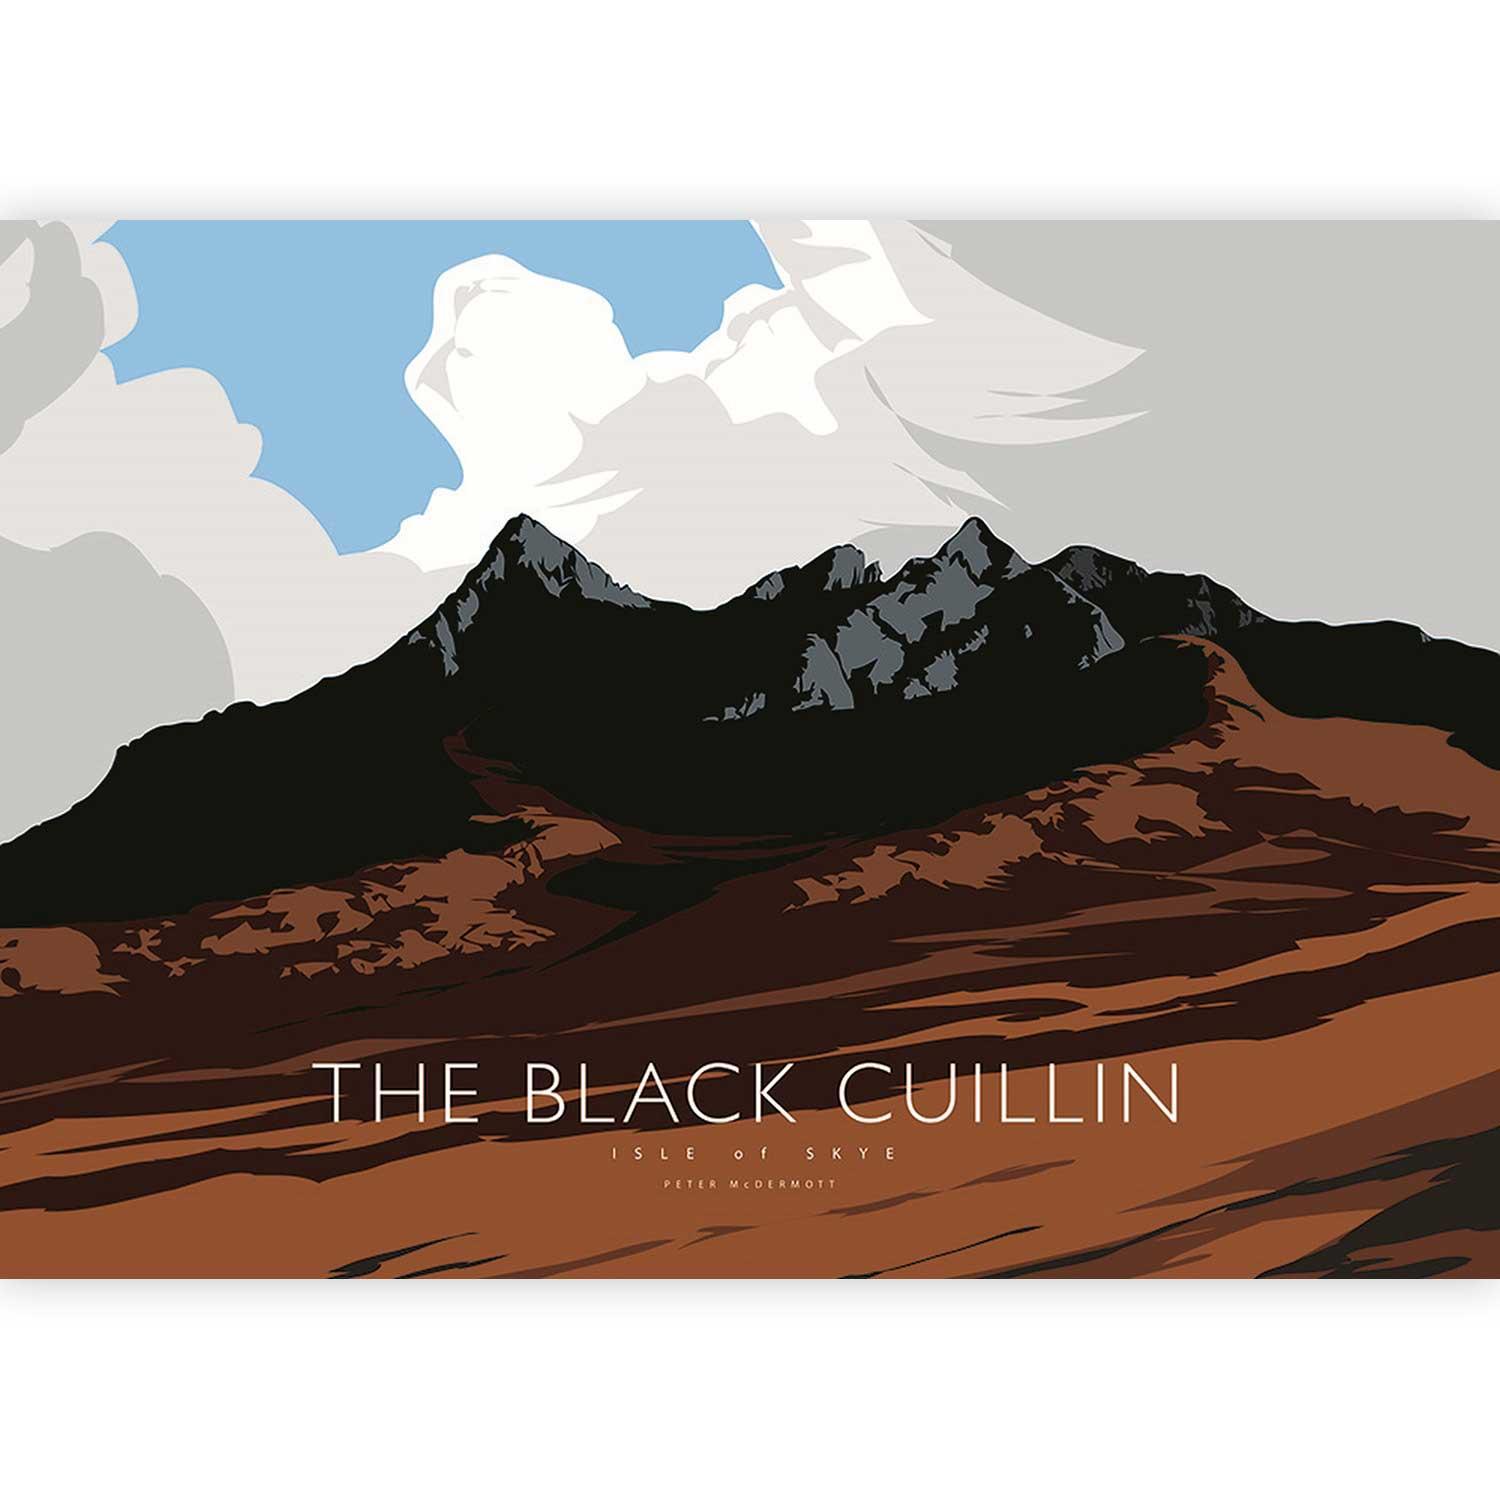 The Black Cuillin by Peter McDermott